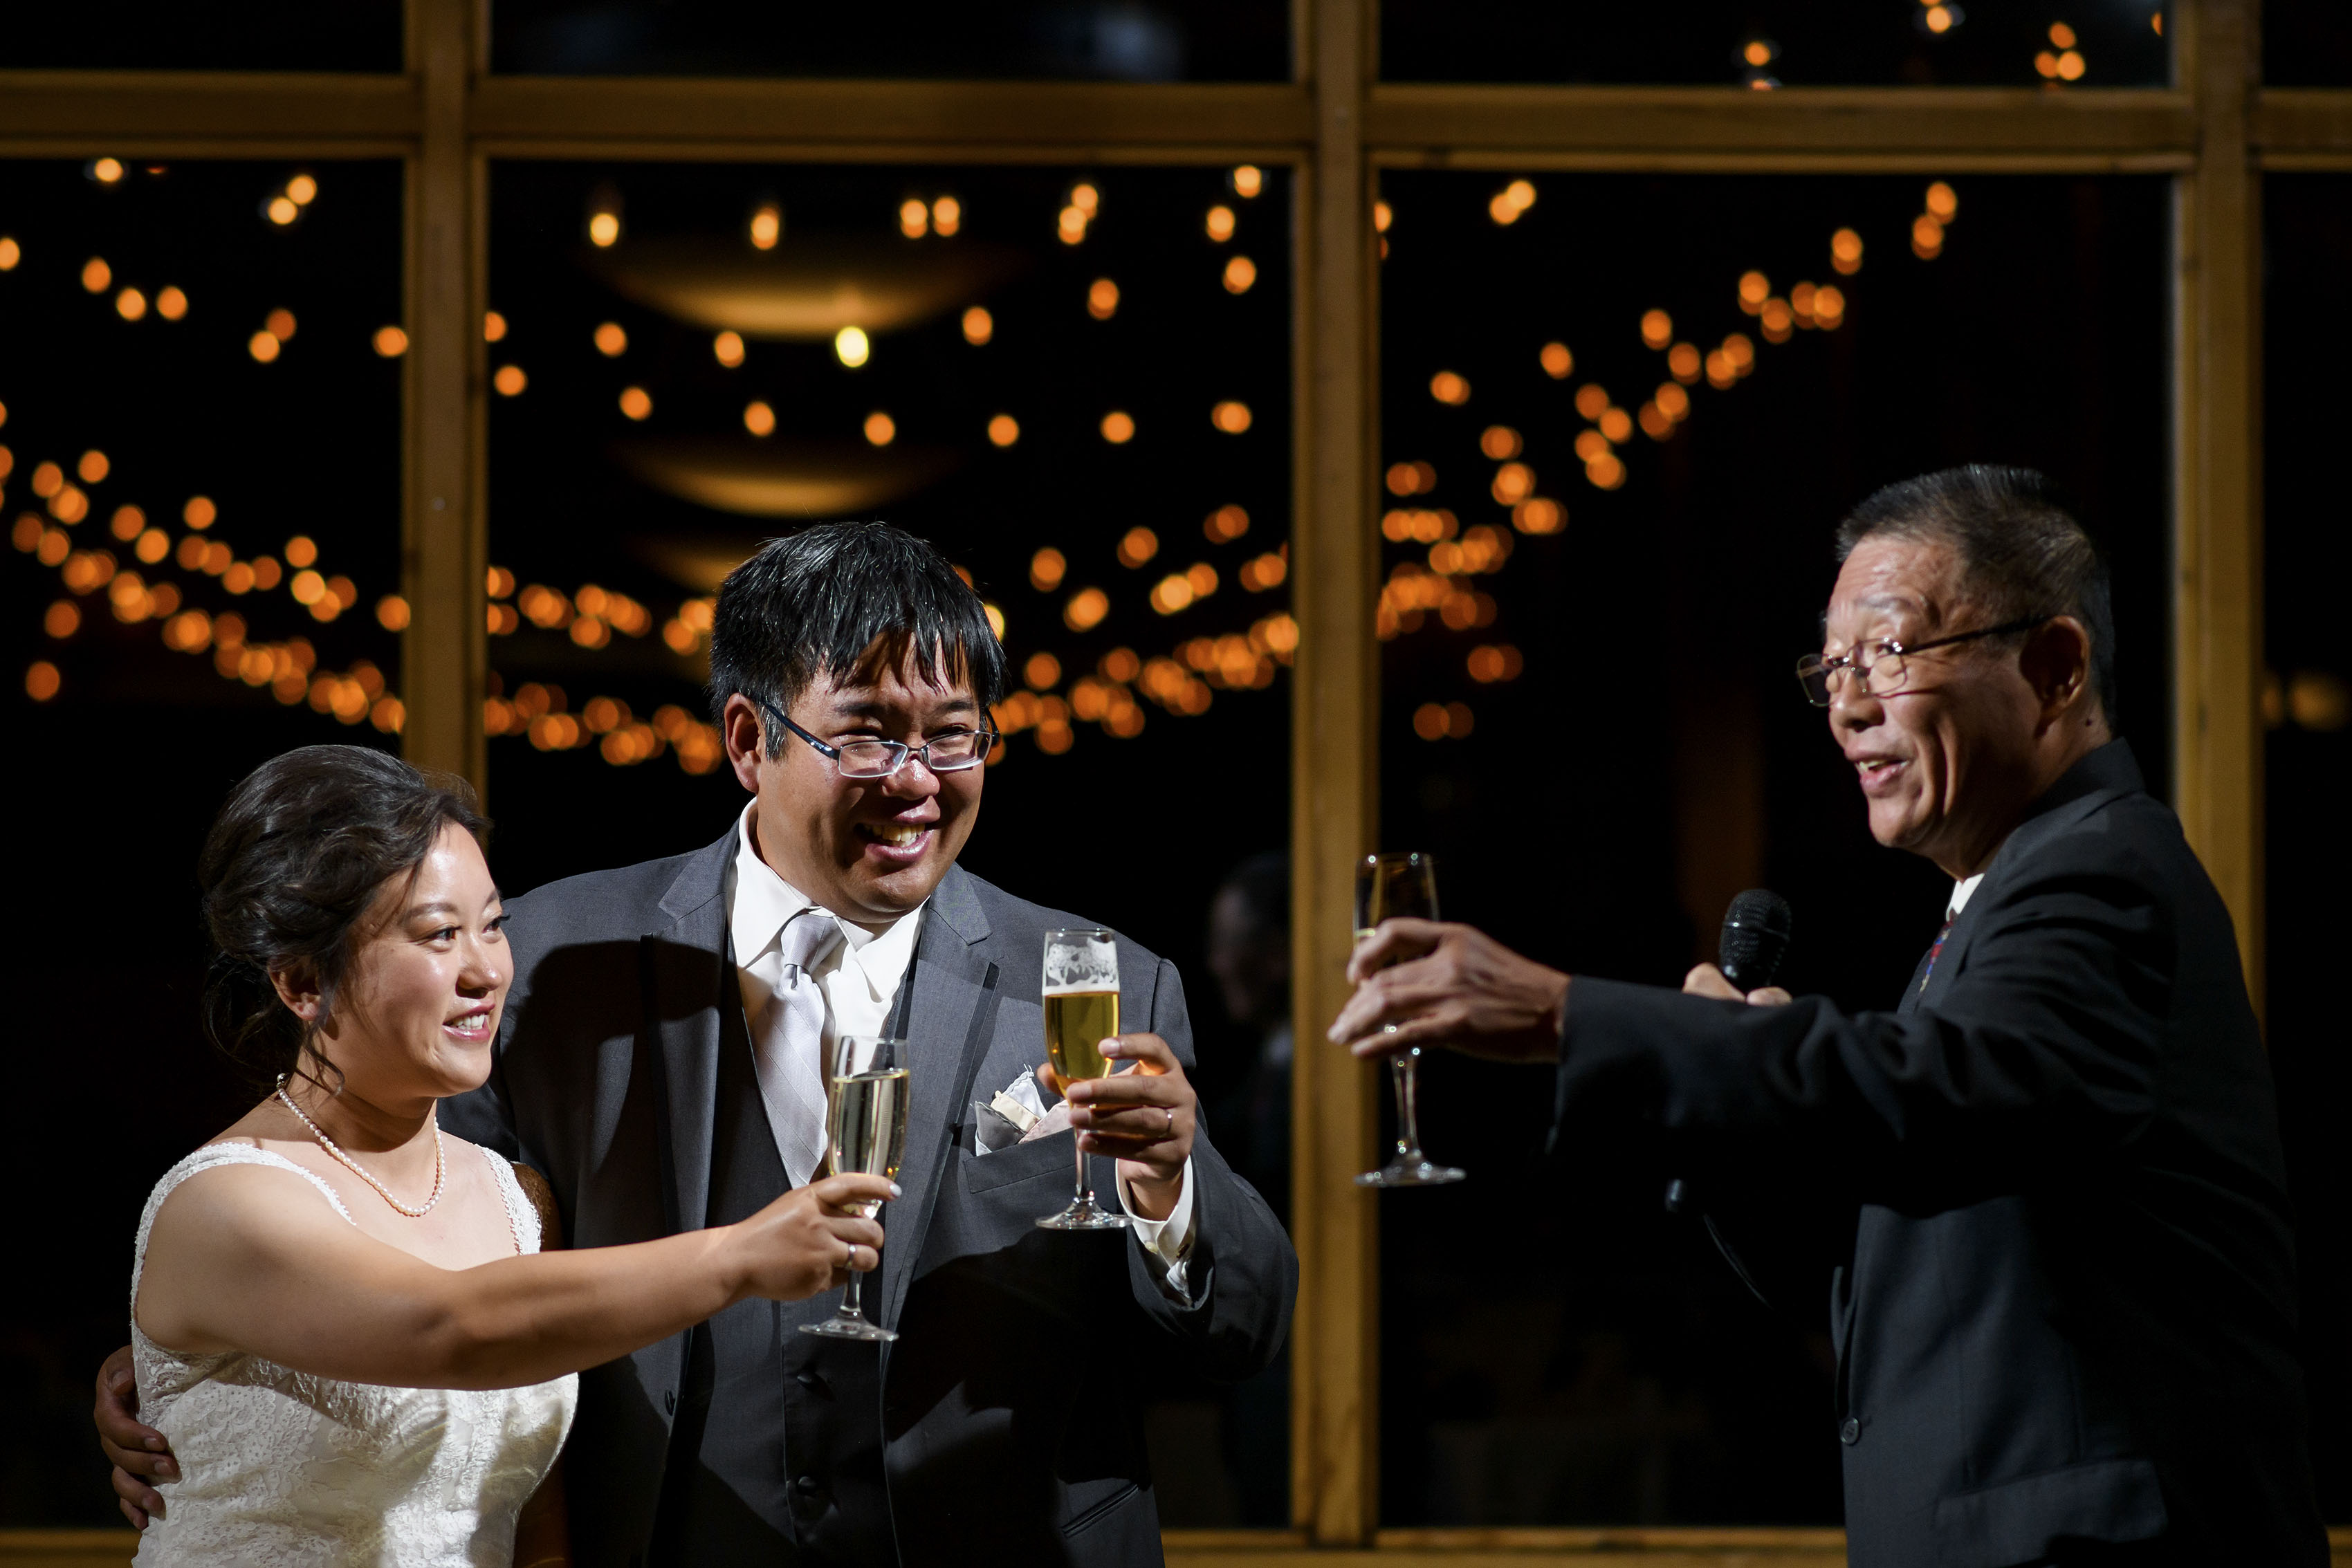 The bride and groom toast his father